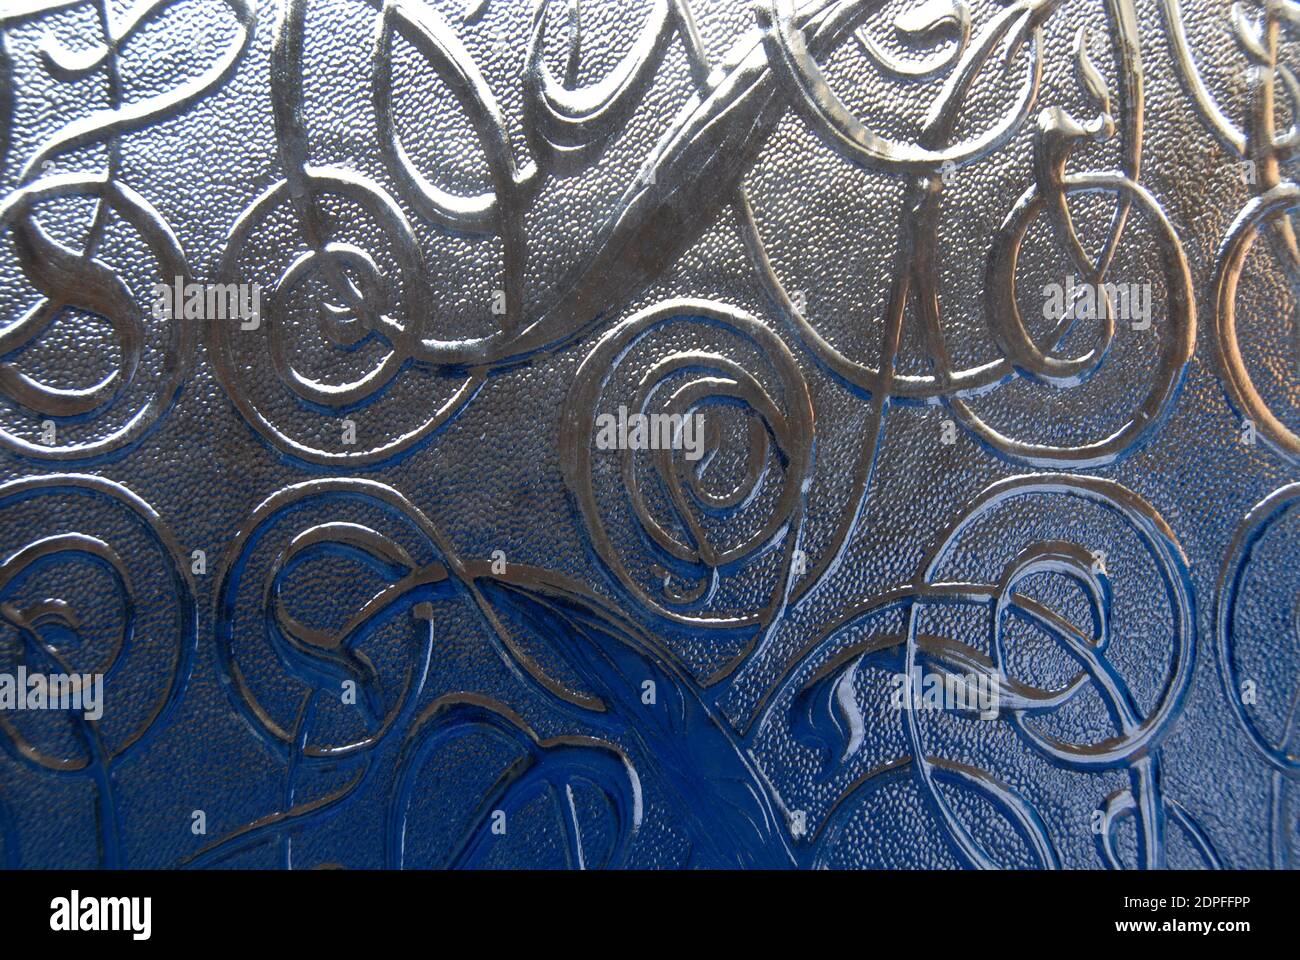 Abstract of patterned glass window Stock Photo